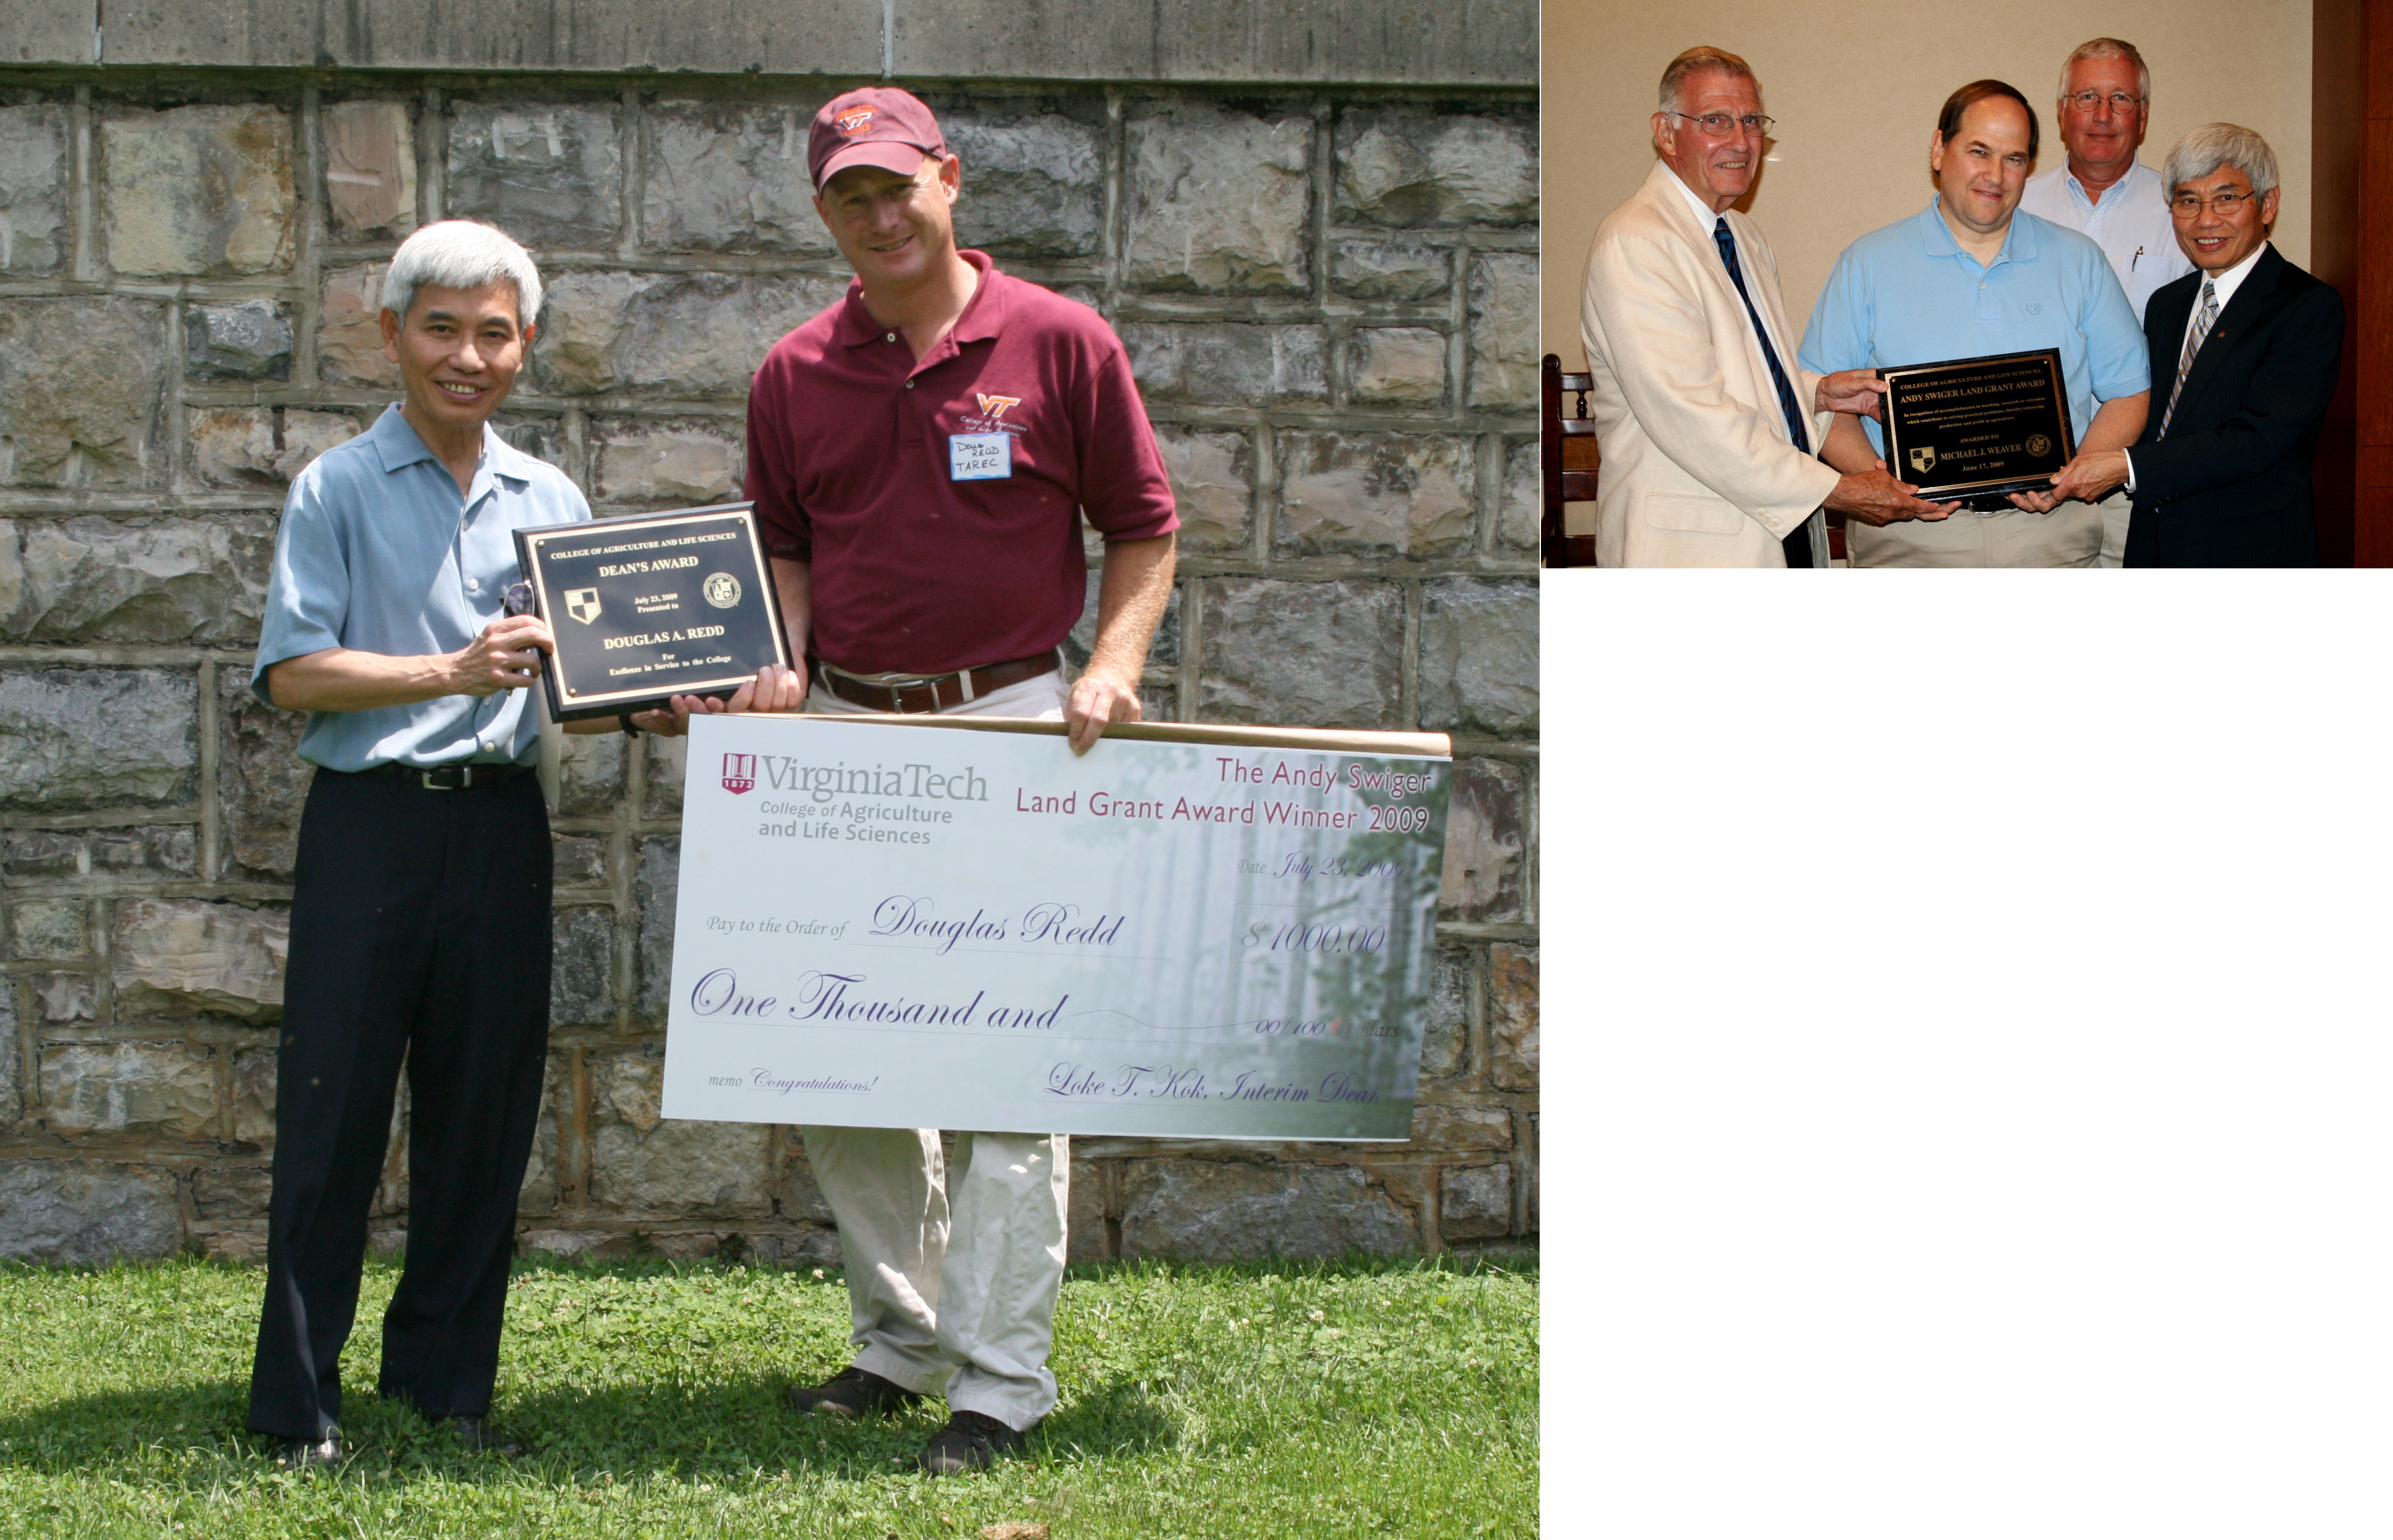 Top image: Loke Kok, interim dean of the College of Agriculture and Life Sciences (left), presents Douglas Redd with the 2009 Swiger Award. Bottom image: Dean Emeritus Andy Swiger (left) presents Michael Weaver with the 2009 Swiger Award. Also pictured: Rick Fell, interim head of the Department of Entomology, and Loke Kok, interim dean of the College of Agriculture and Life Sciences.